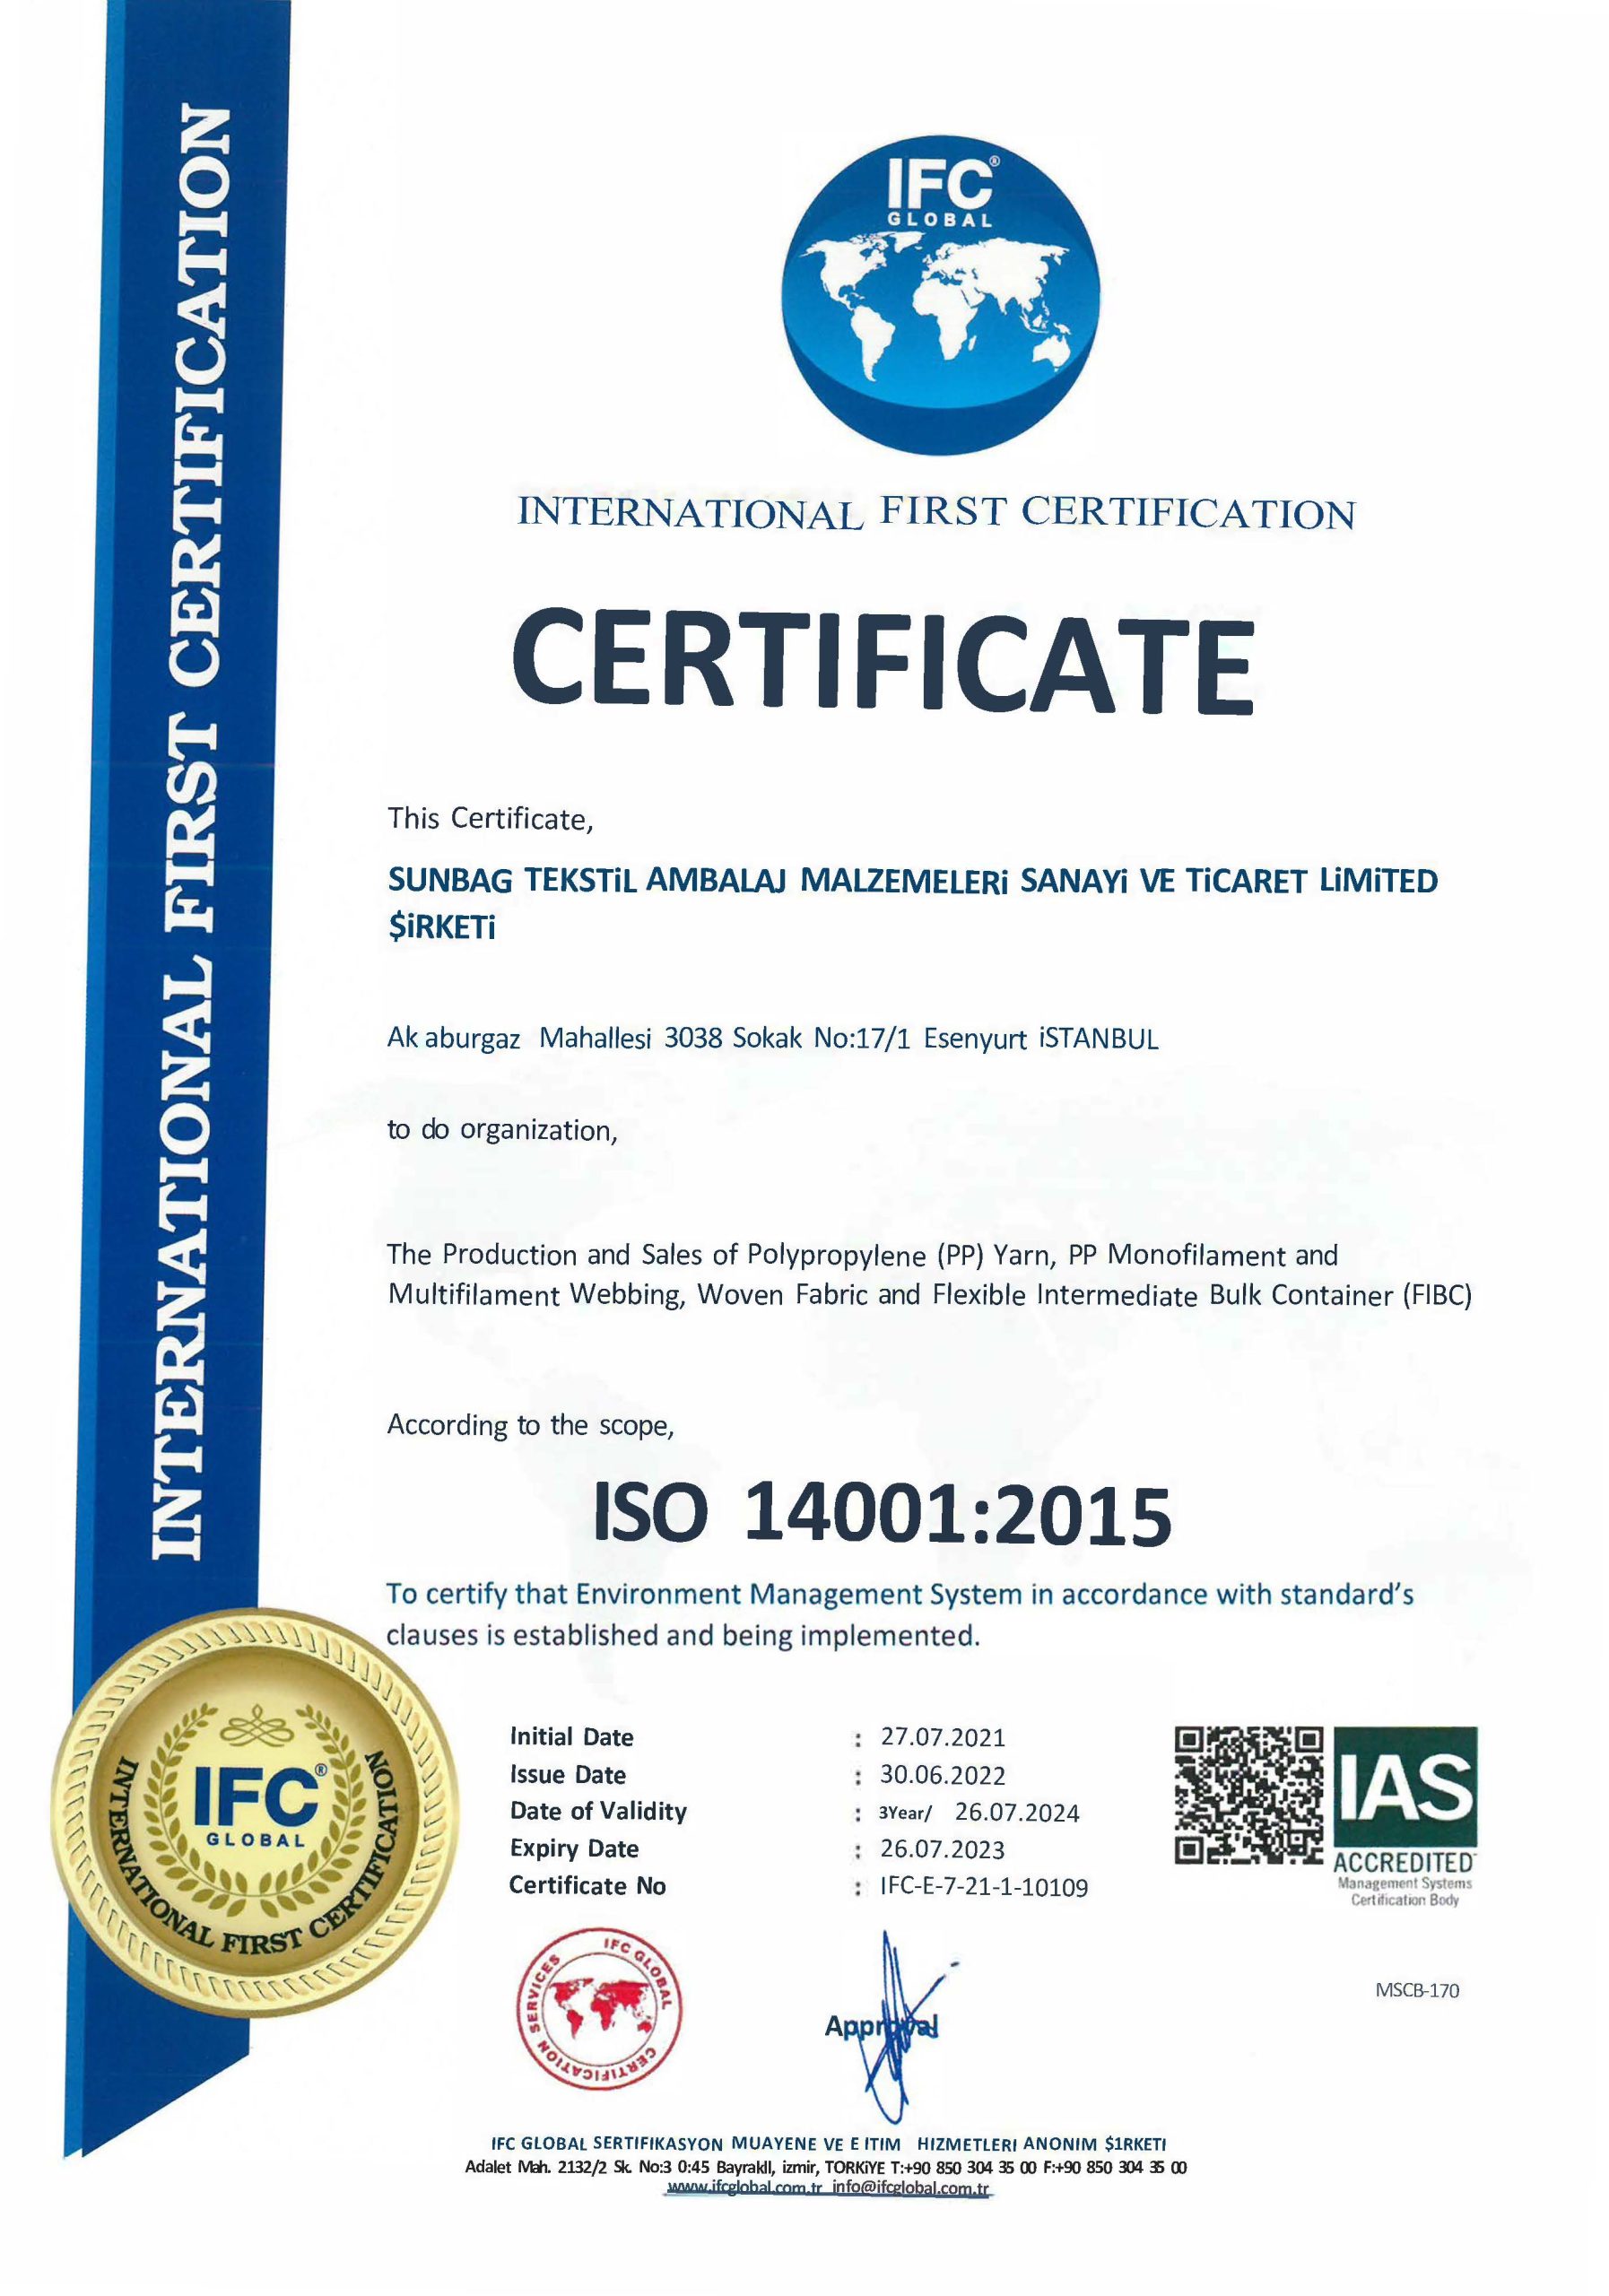 929-iso-14001-2015-environmental-management-system